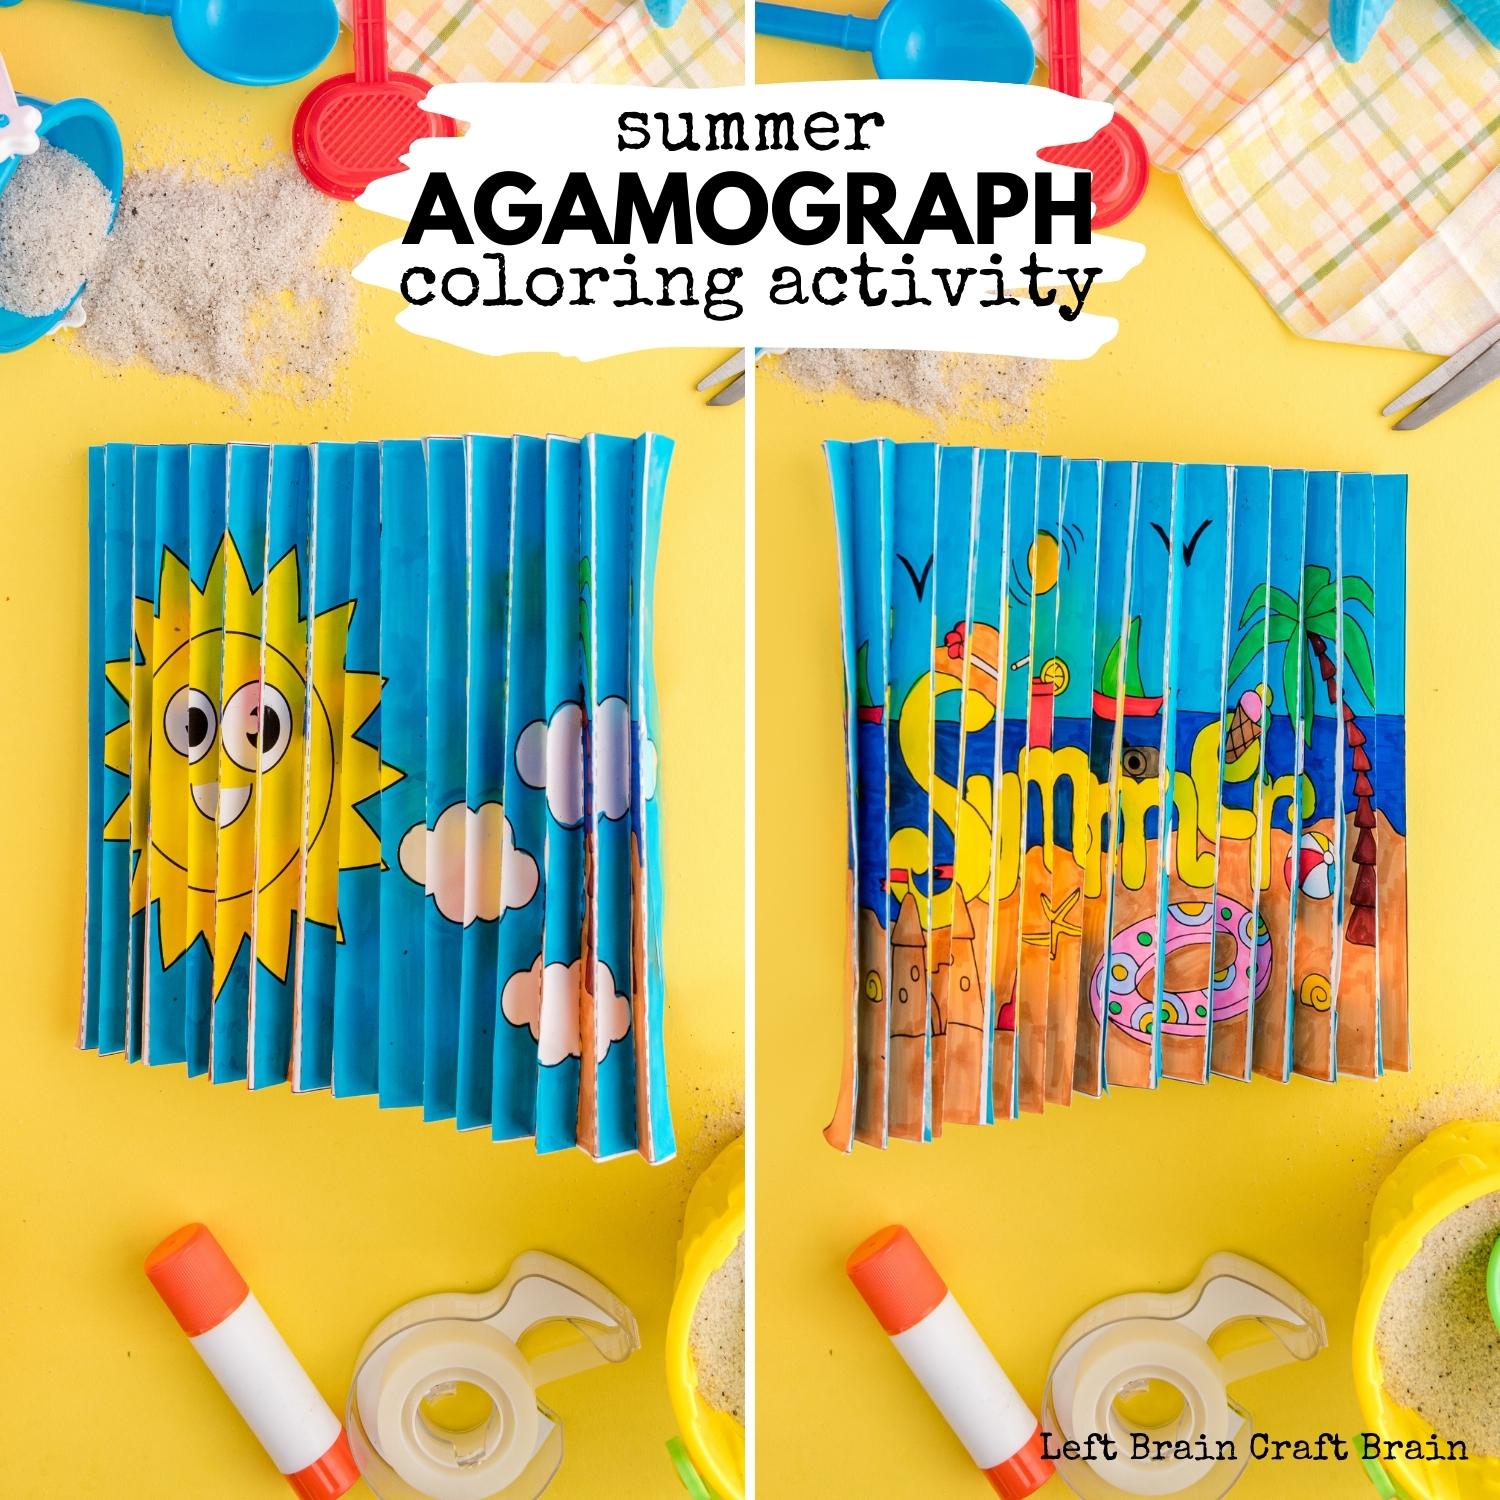 summer agamograph coloring activity with sun and beach coloring pages on yellow